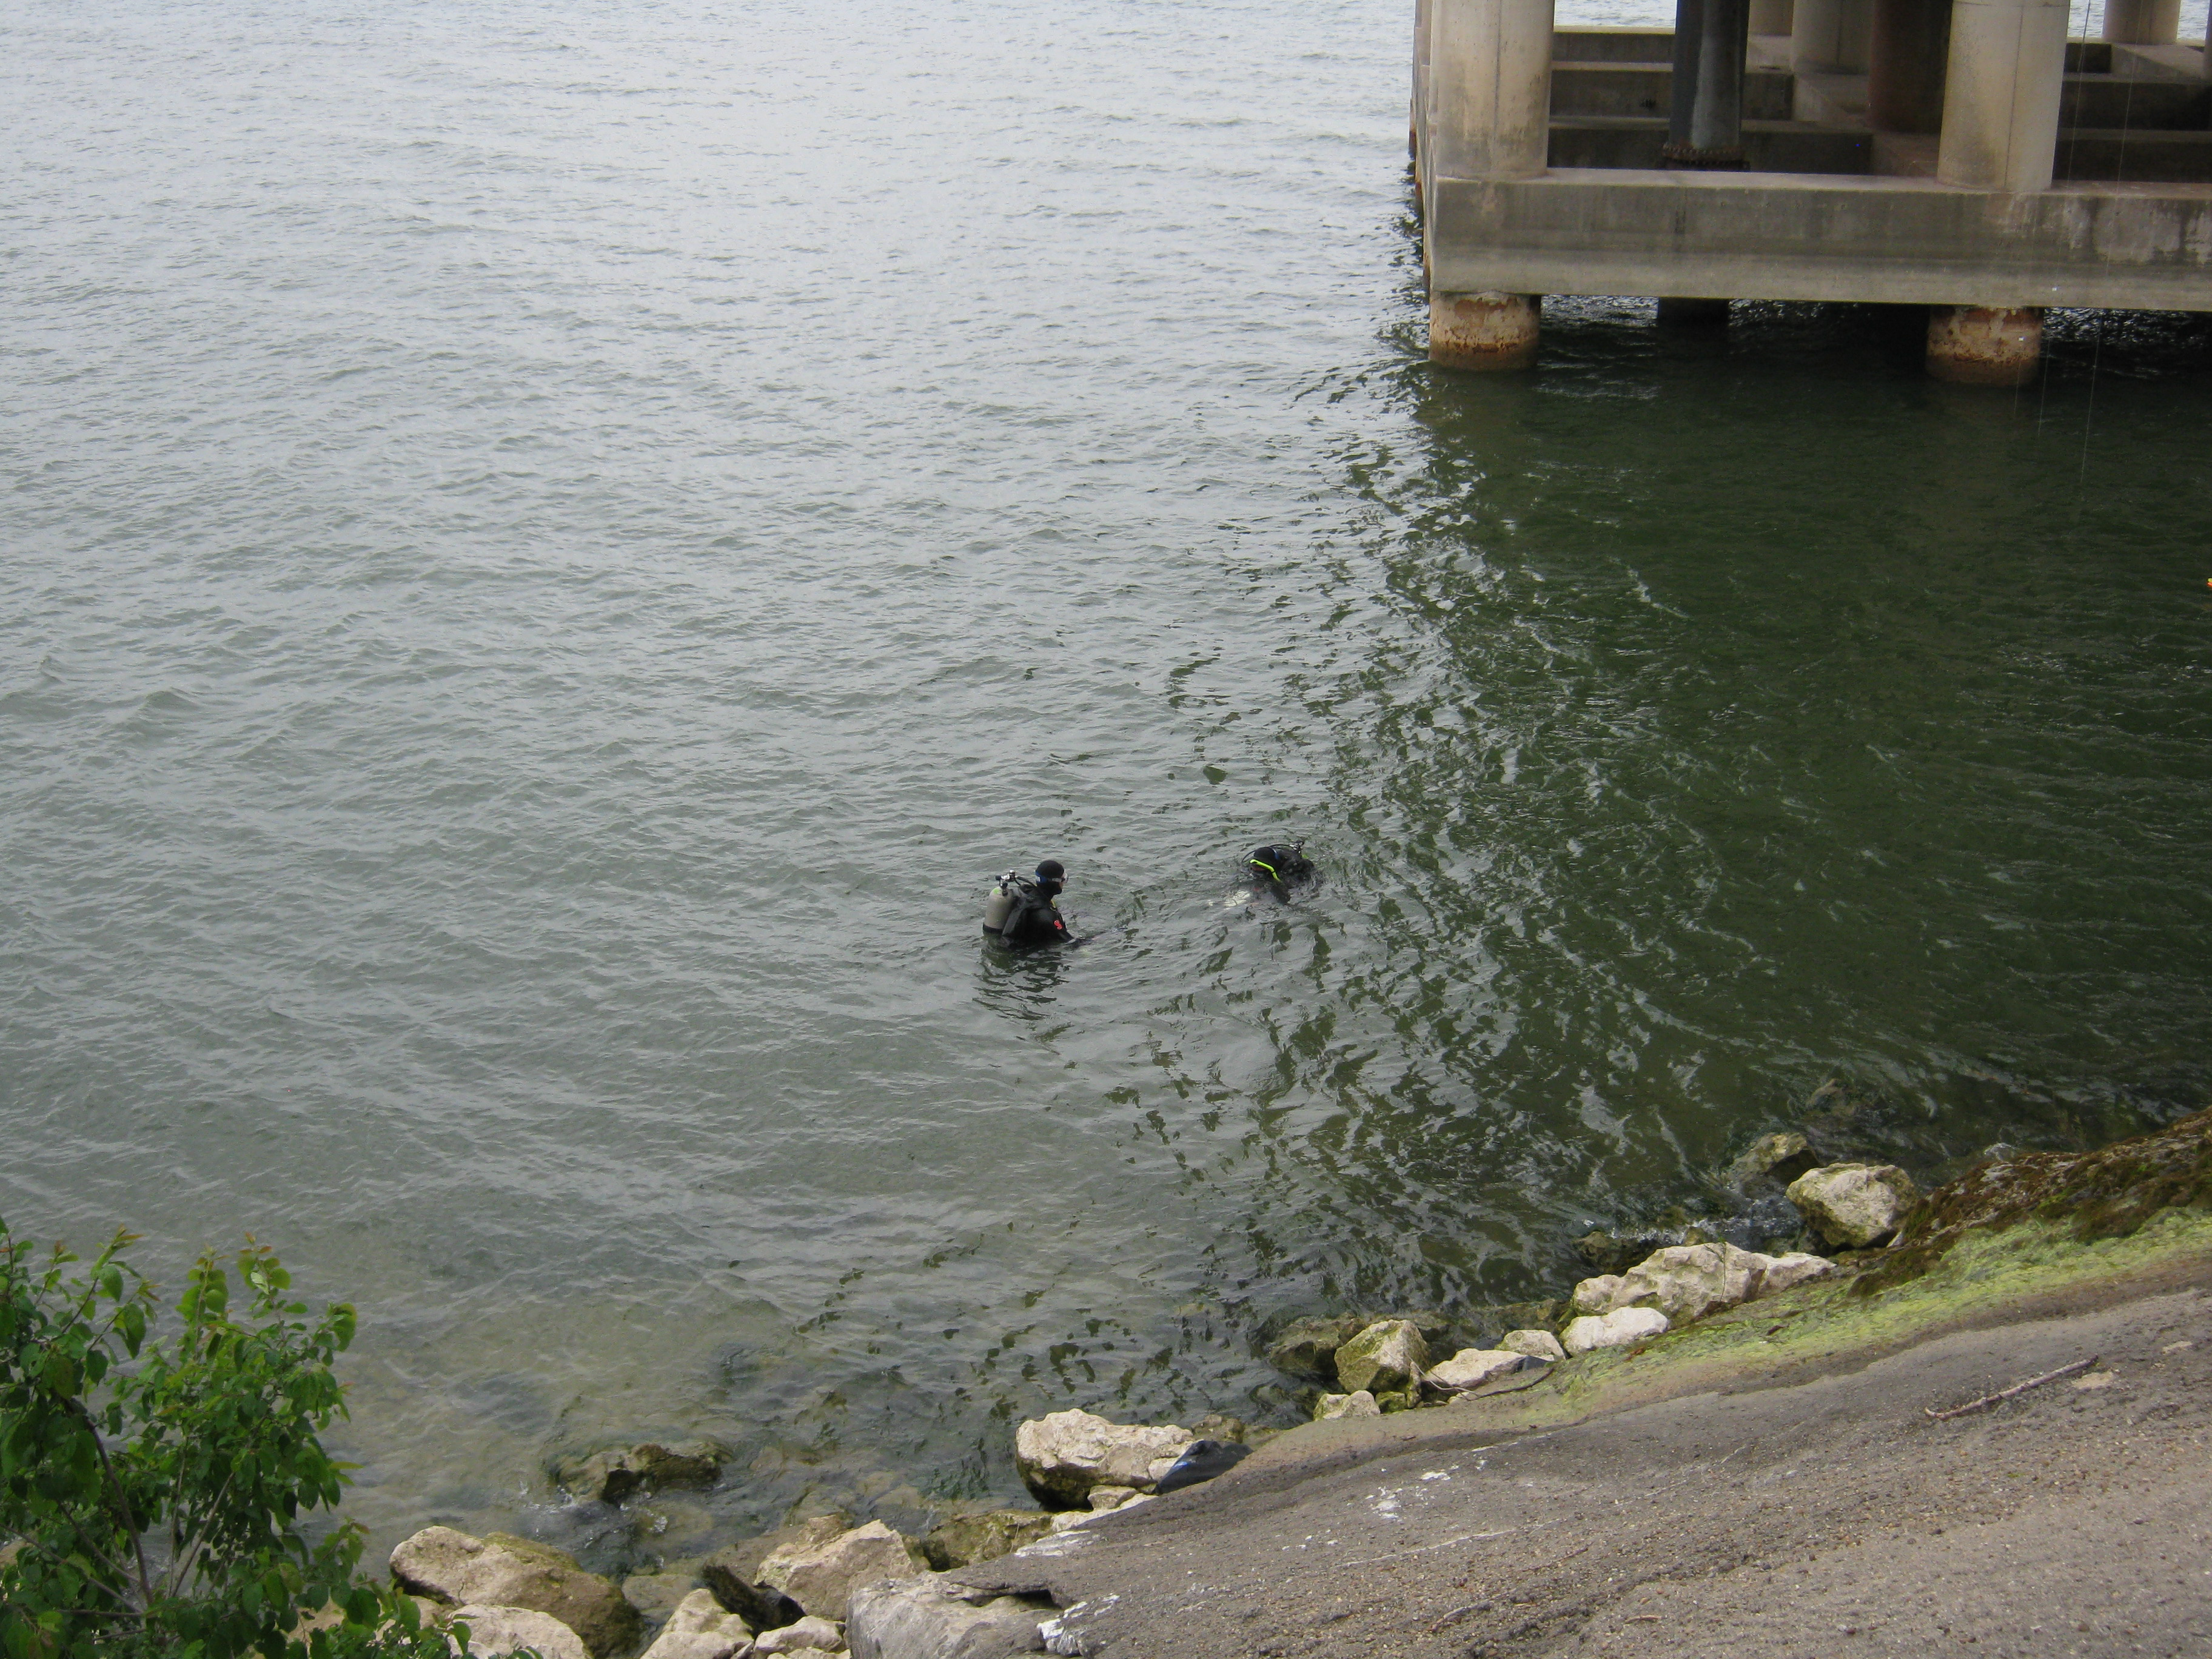 Two scuba divers, swimming across the surface of the water towards a large concrete structure in the lake.